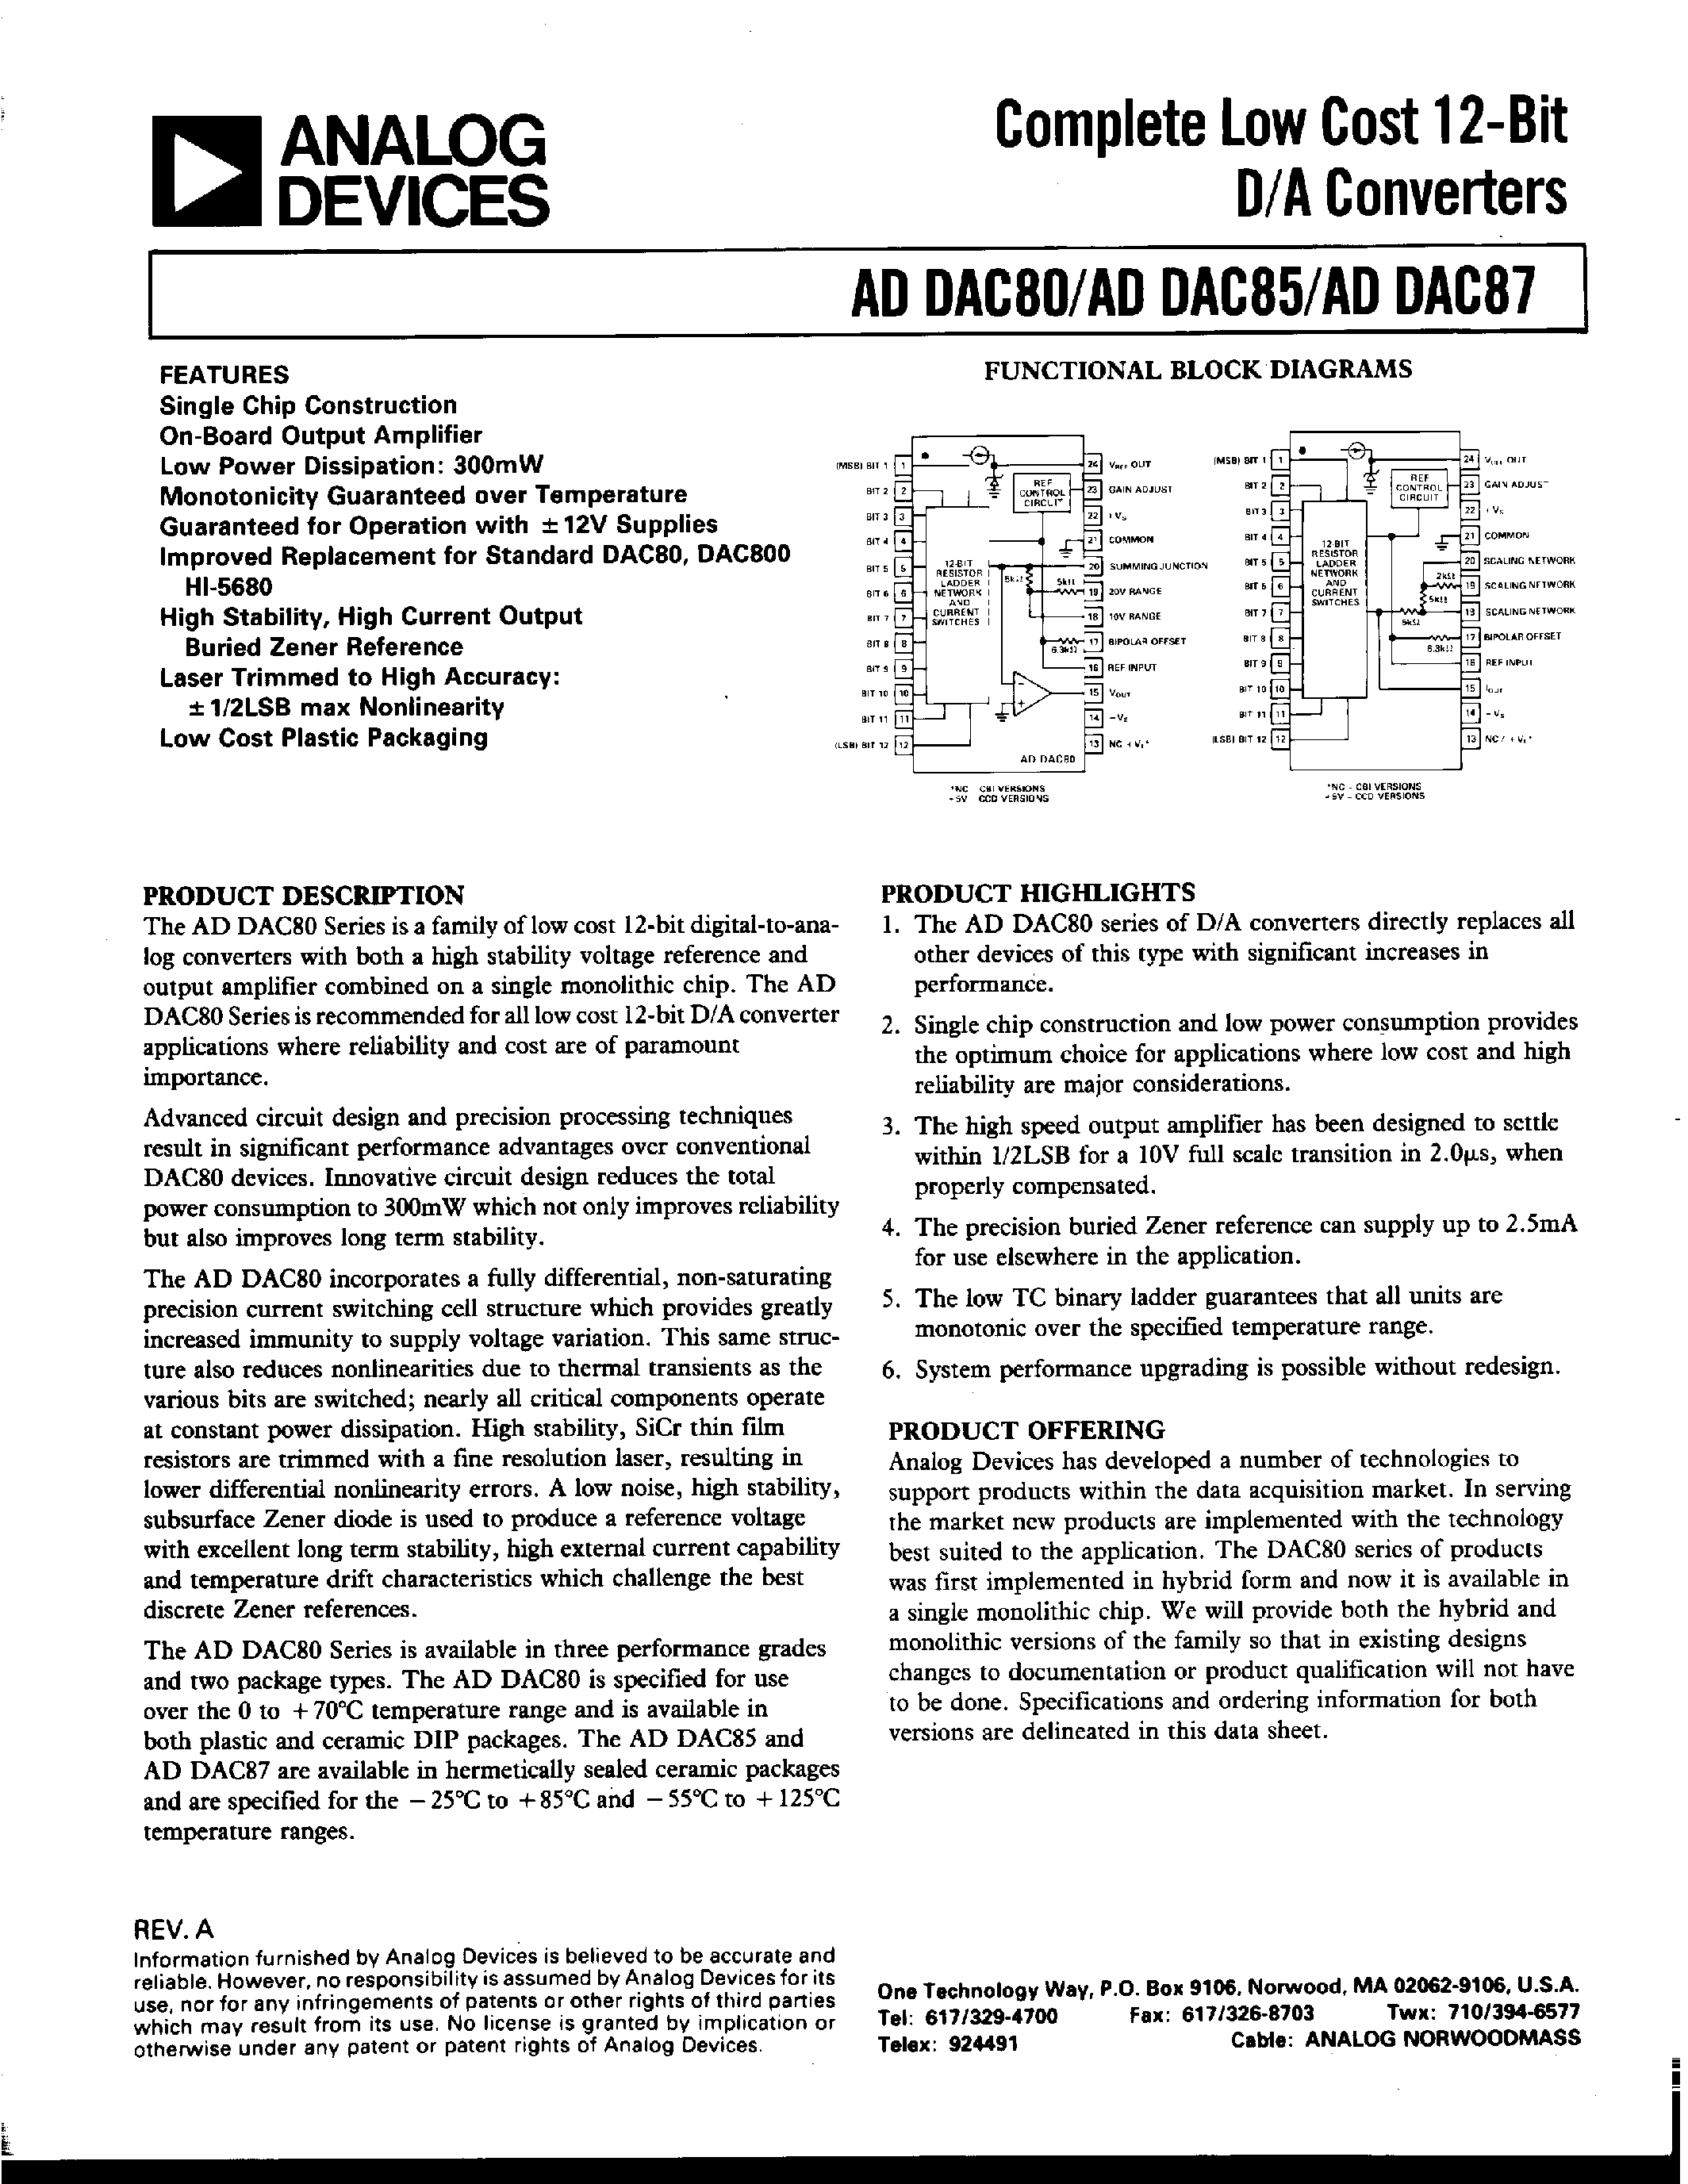 Datasheet ADDAC80 - COMPLETE LOW COST 12-BIT D/A CONVERTERS page 1